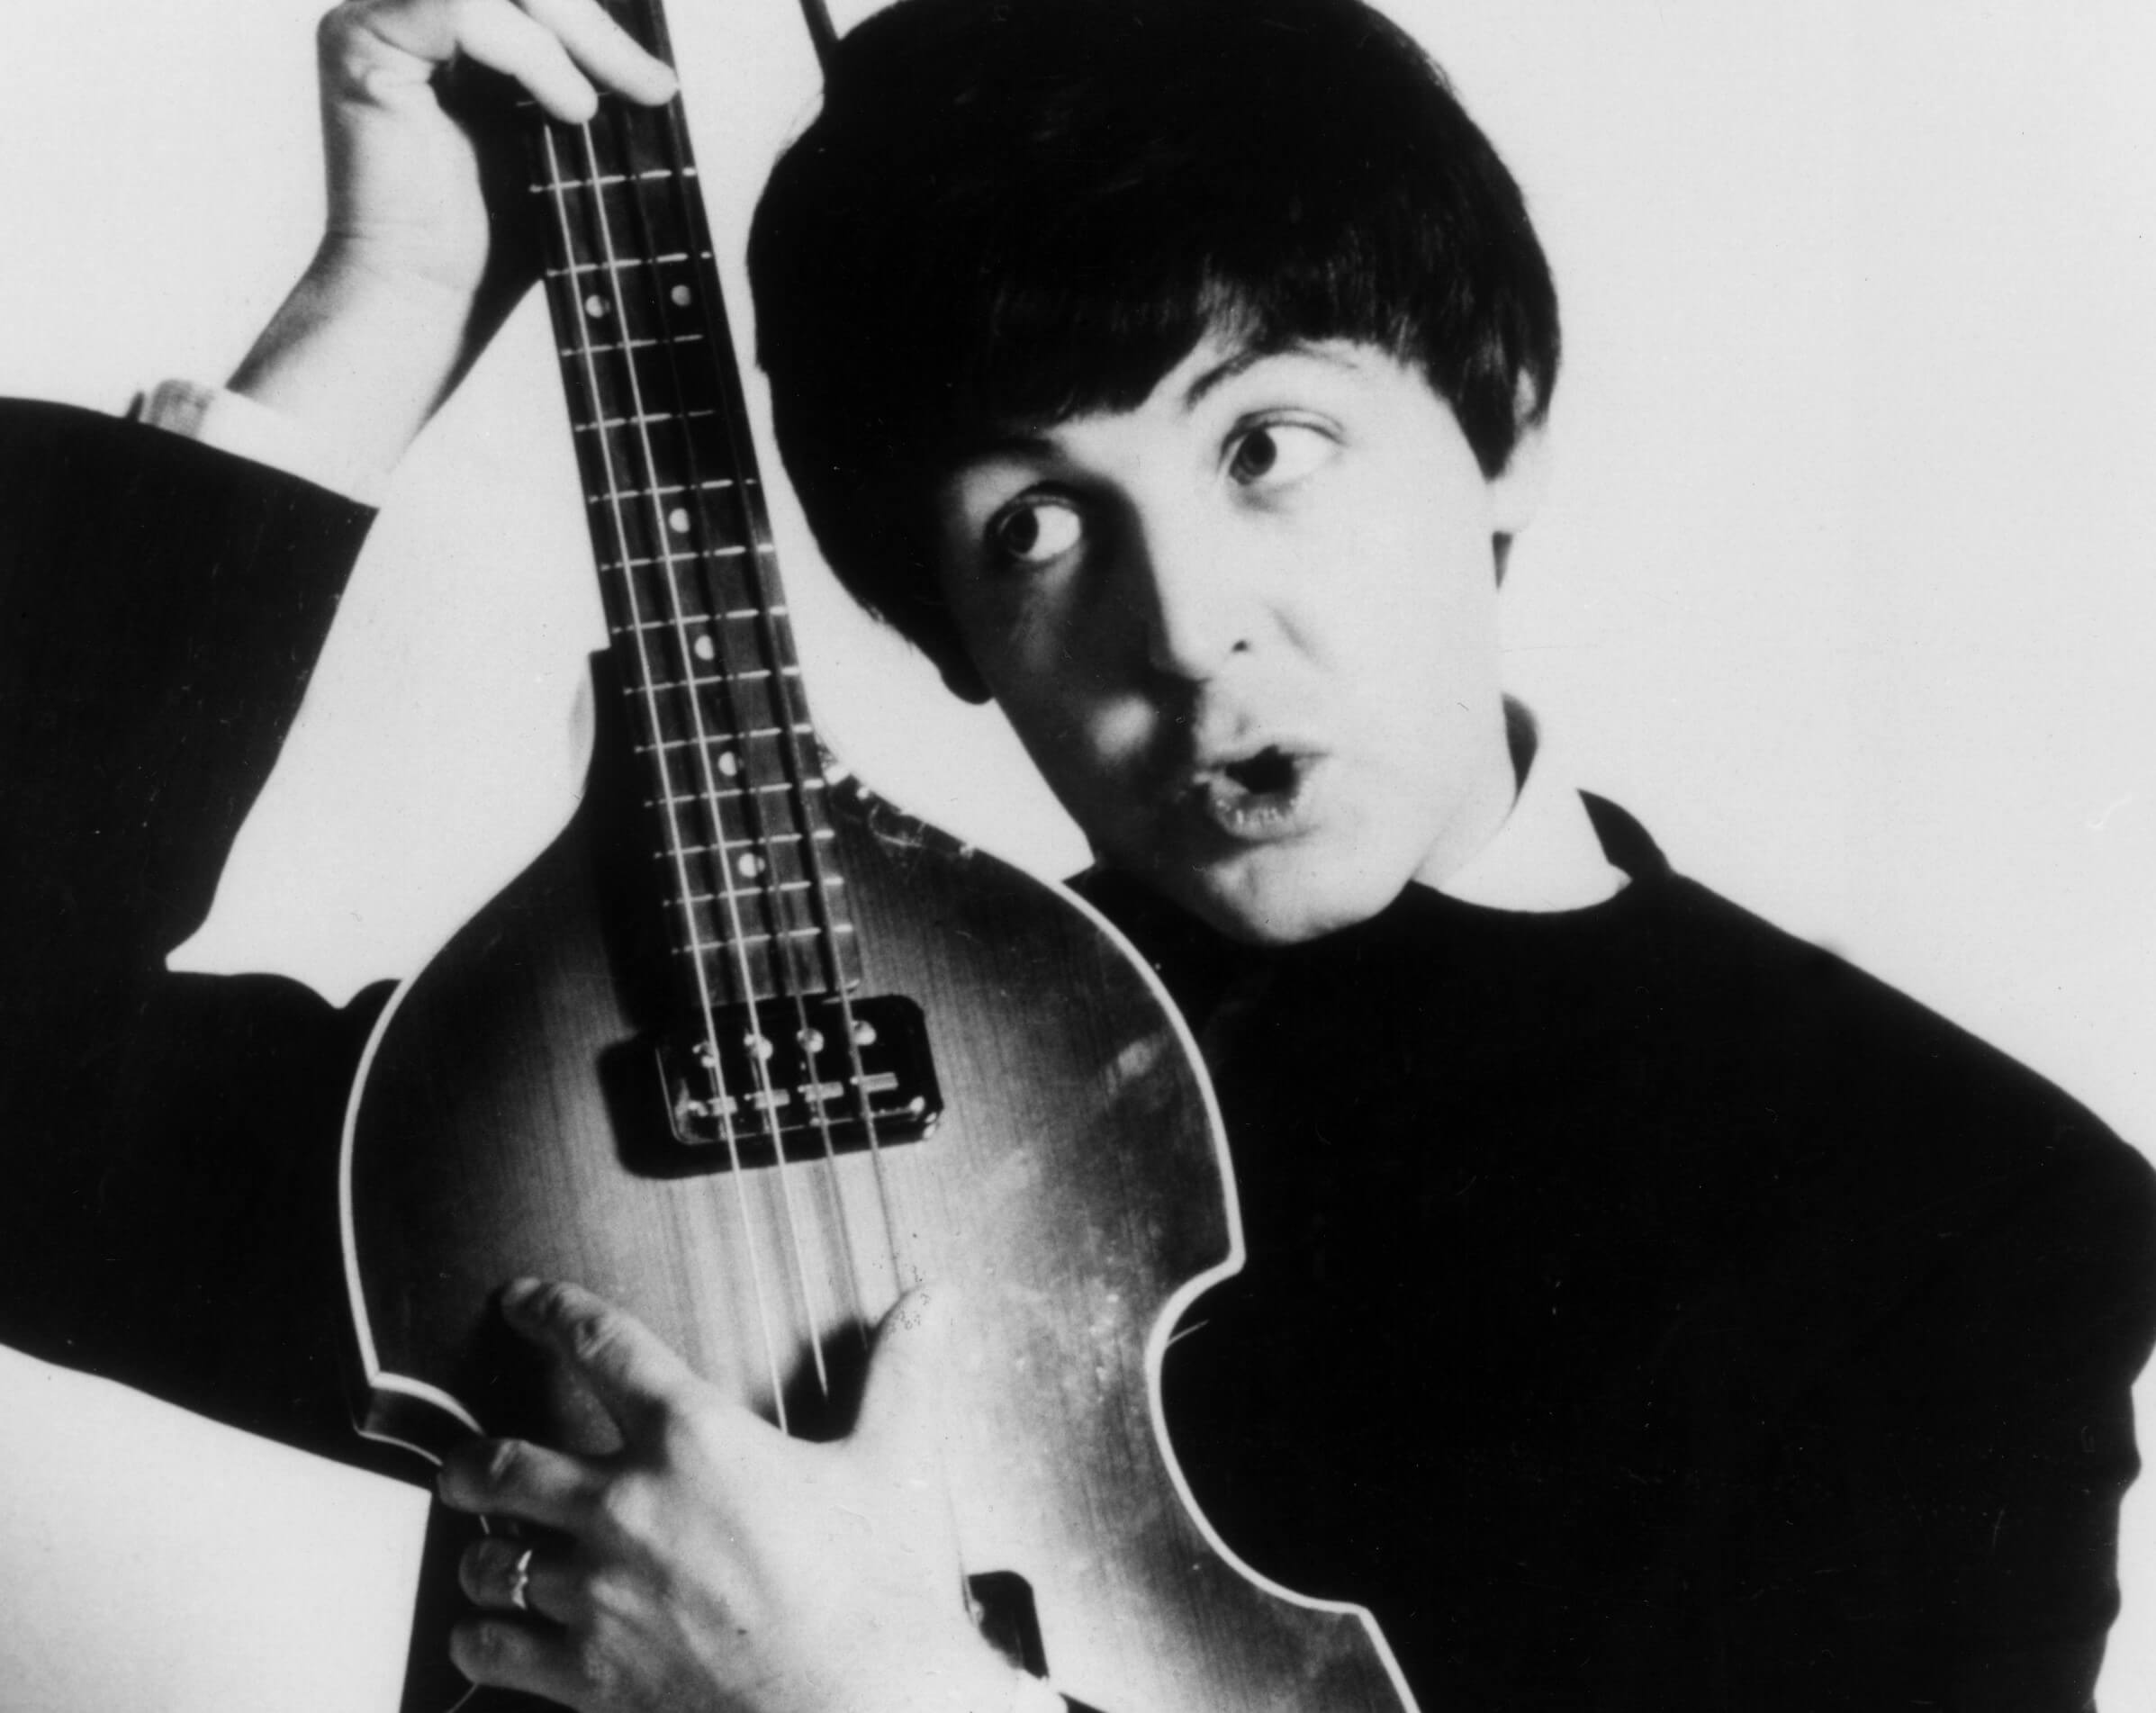 The Beatles' Paul McCartney with an instrument